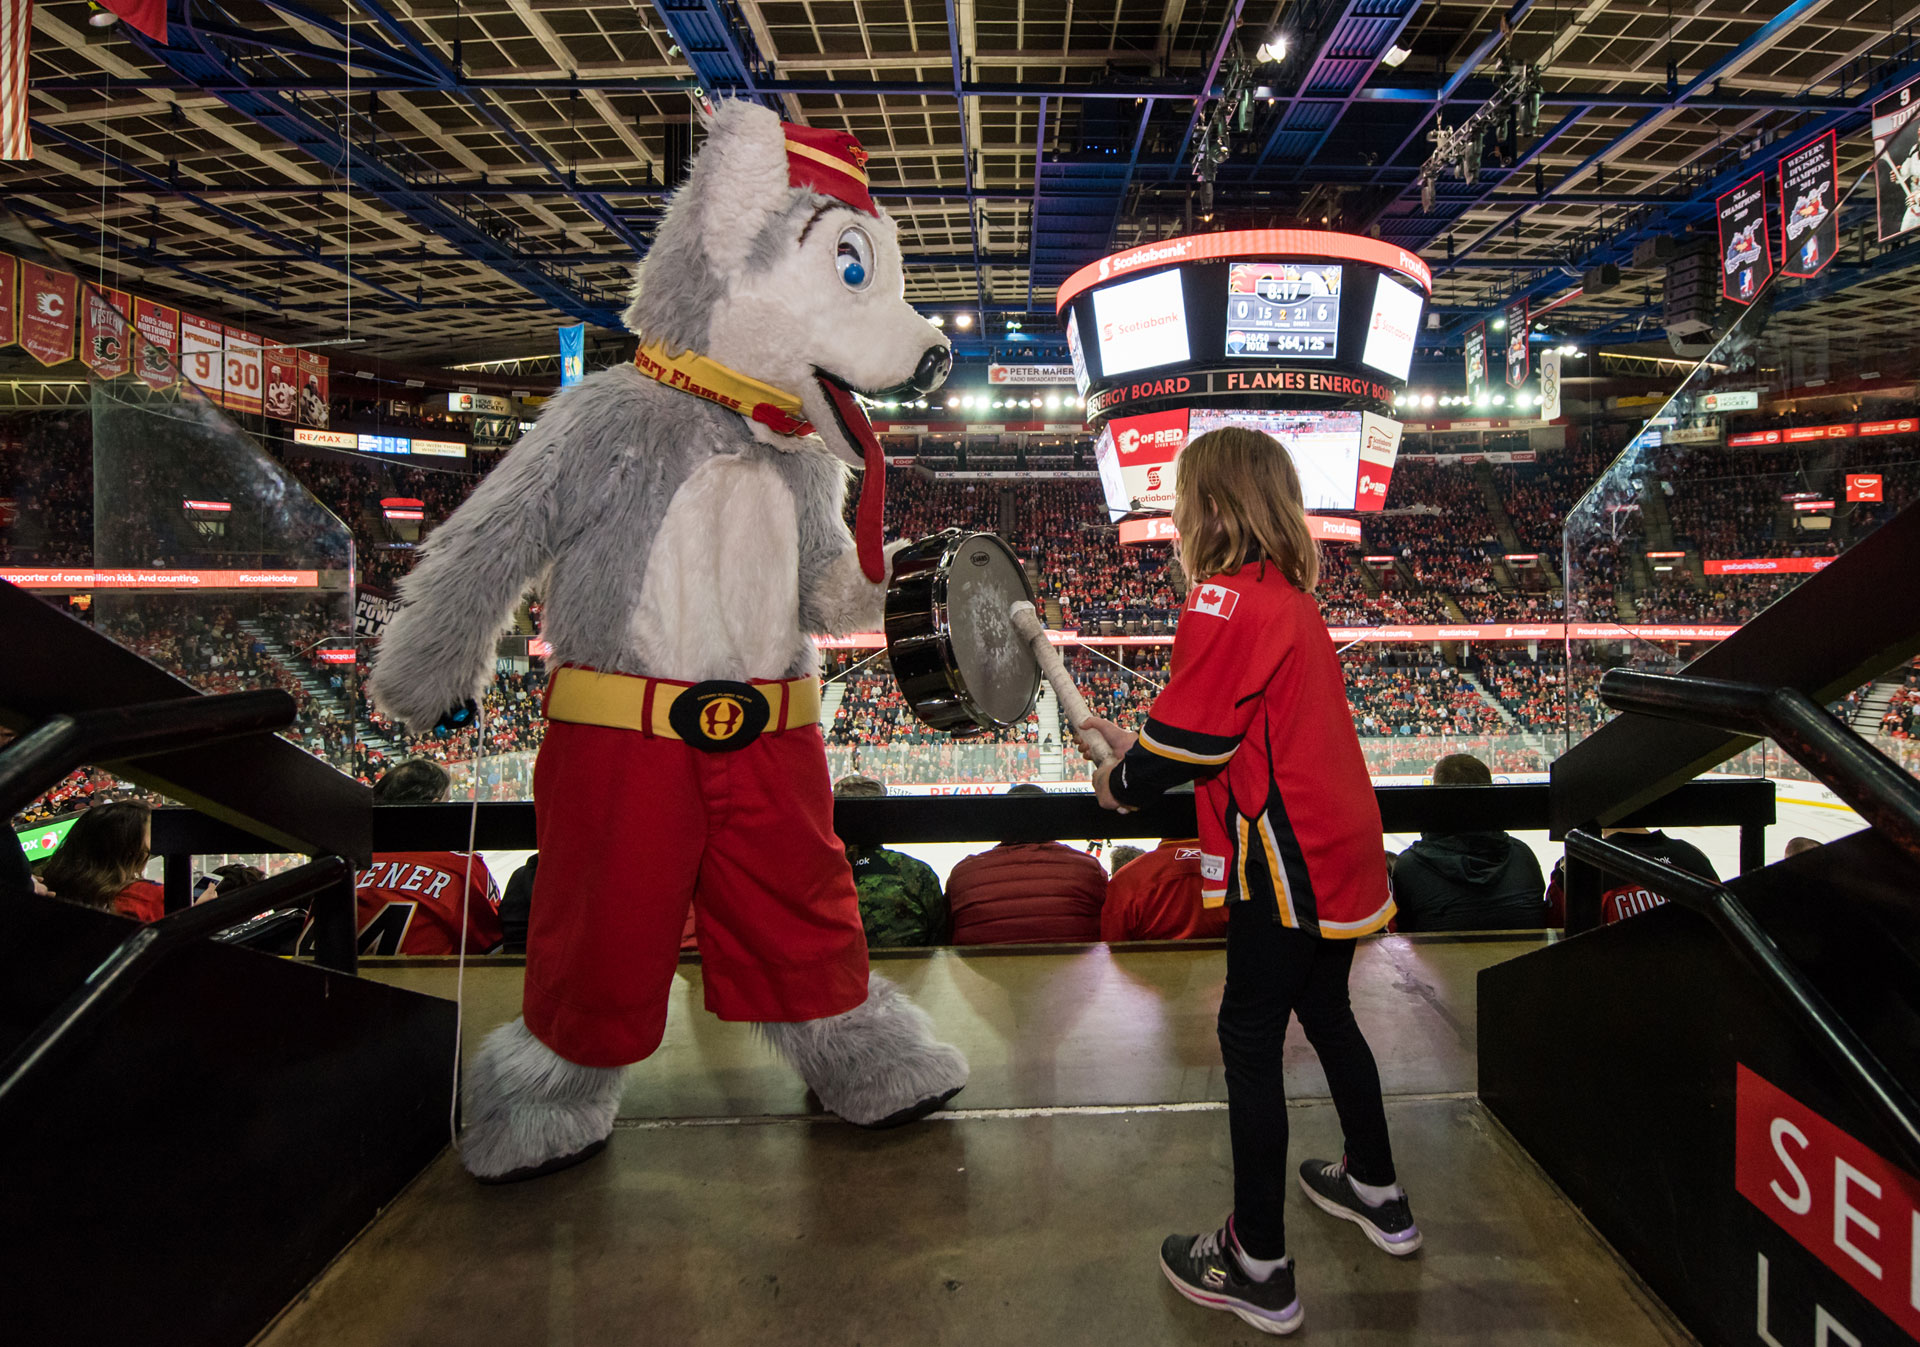 Harvey the Hound pounding a drum with a young guest at the Calgary Flames game, Scotiabank Saddledome